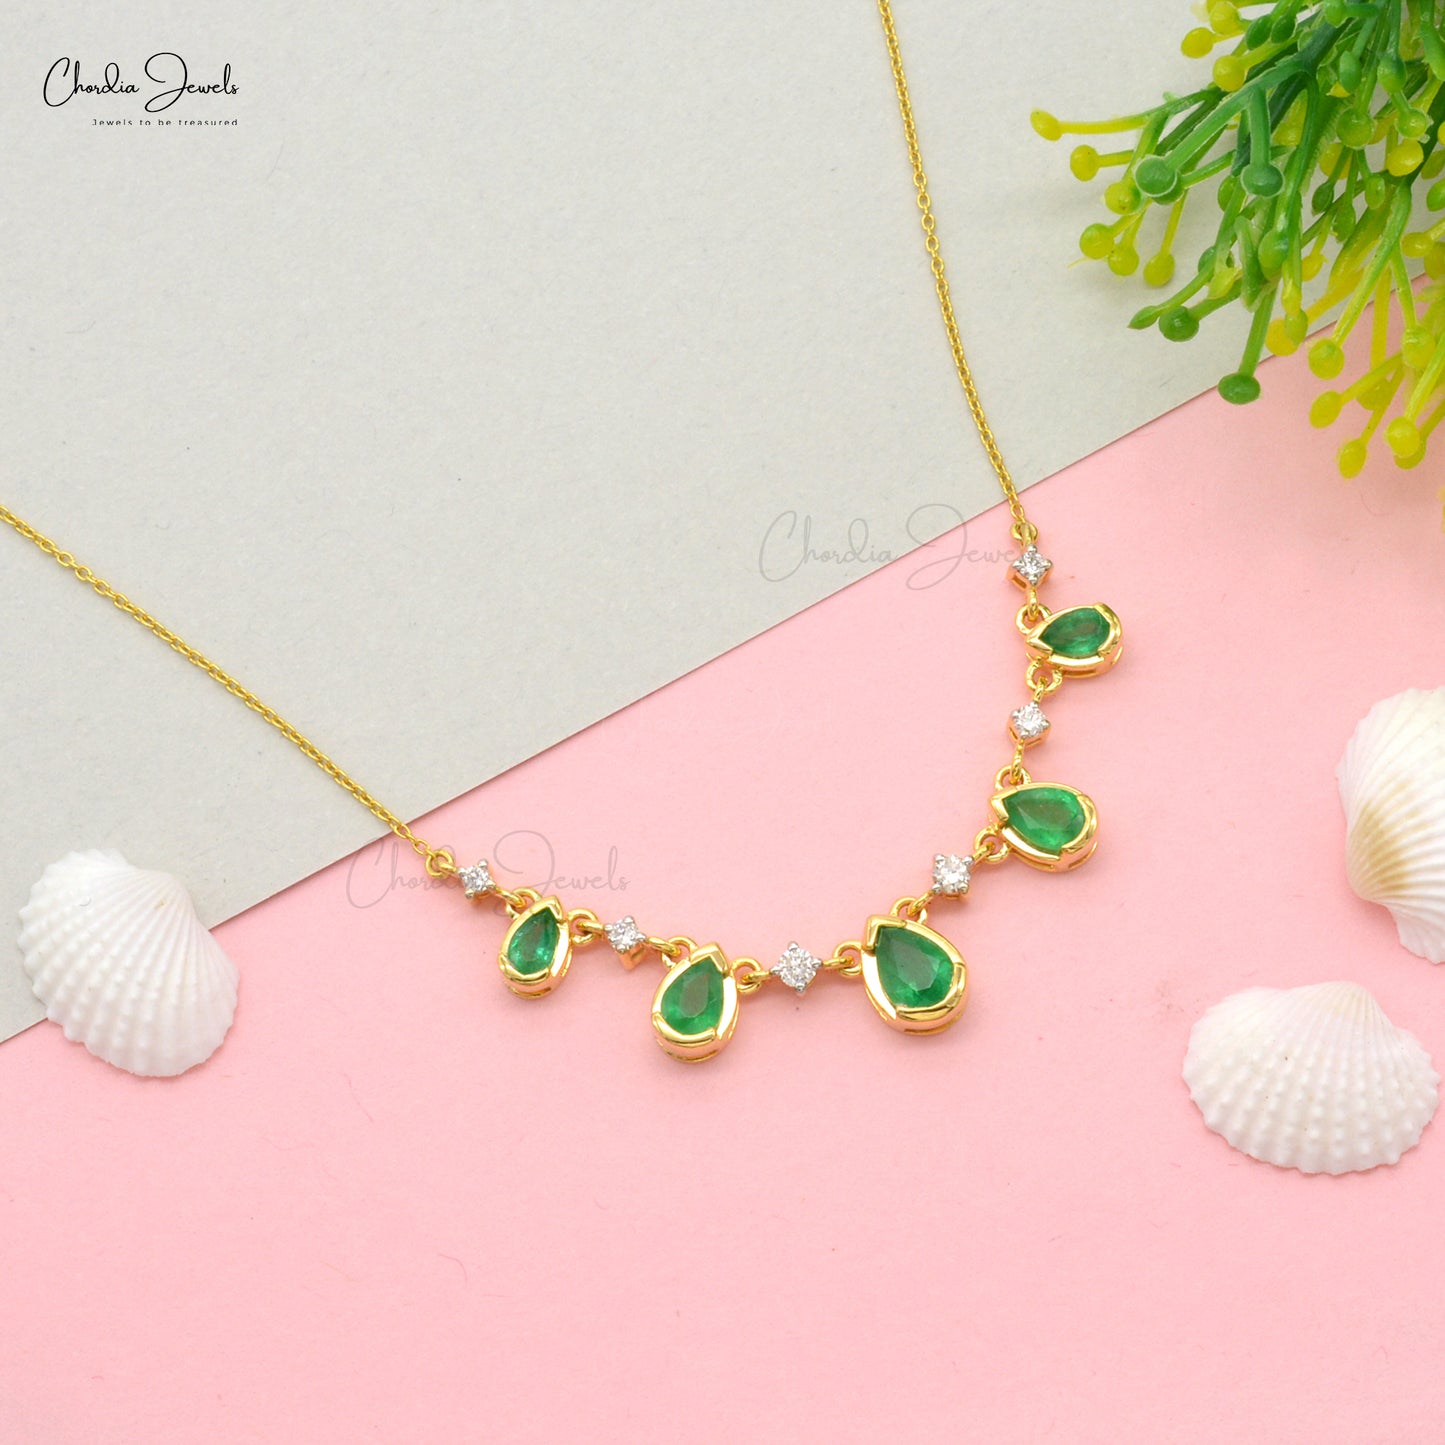 Pear Cut 1.74 Ct Natural Green Emerald Statement Necklace, April Birthstone White Diamond Necklace For Women, 14k Solid Yellow Gold Minimalist Wedding Jewelry